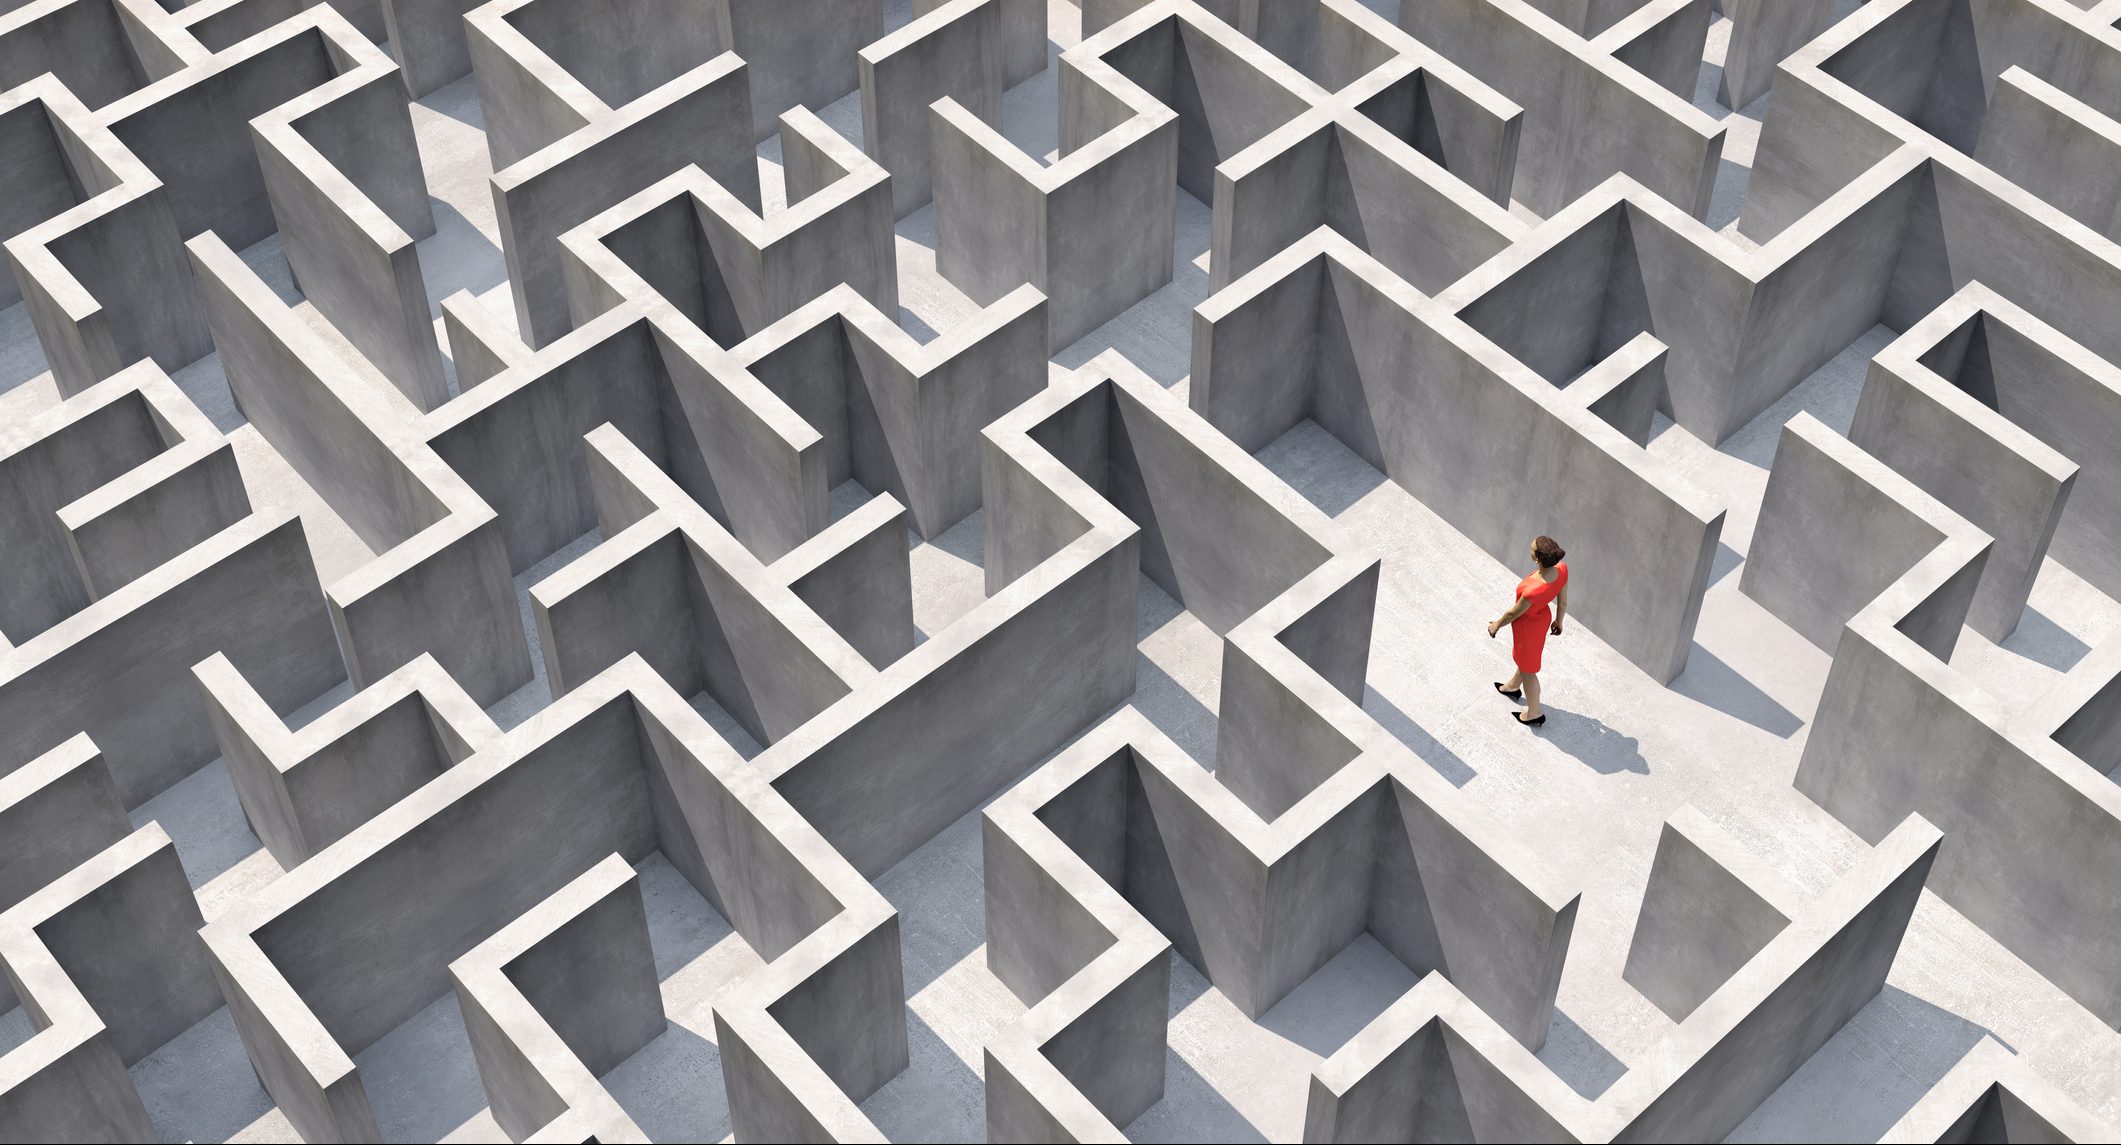 Full frame business woman in a complex maze